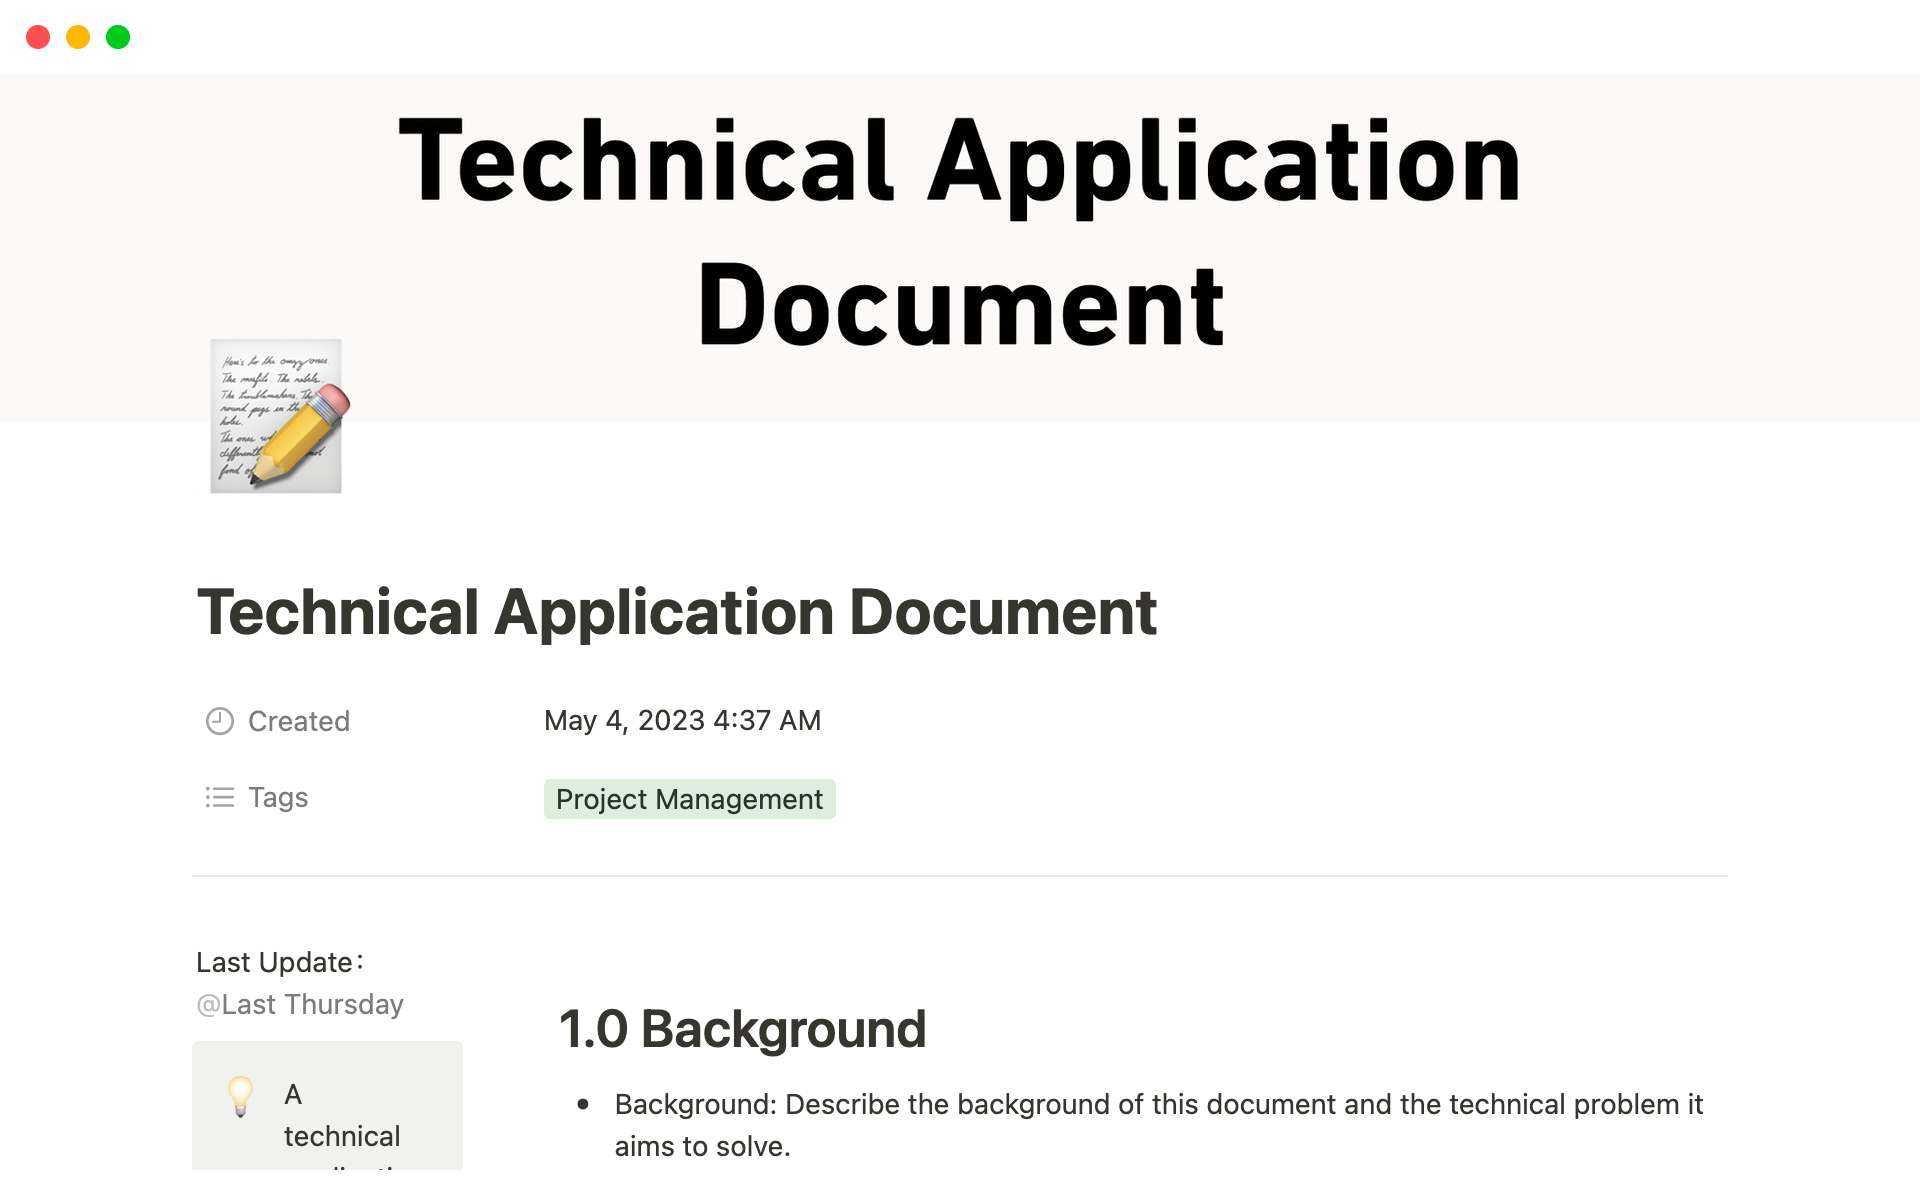 Technical application documents are files that help users understand and use technical products.